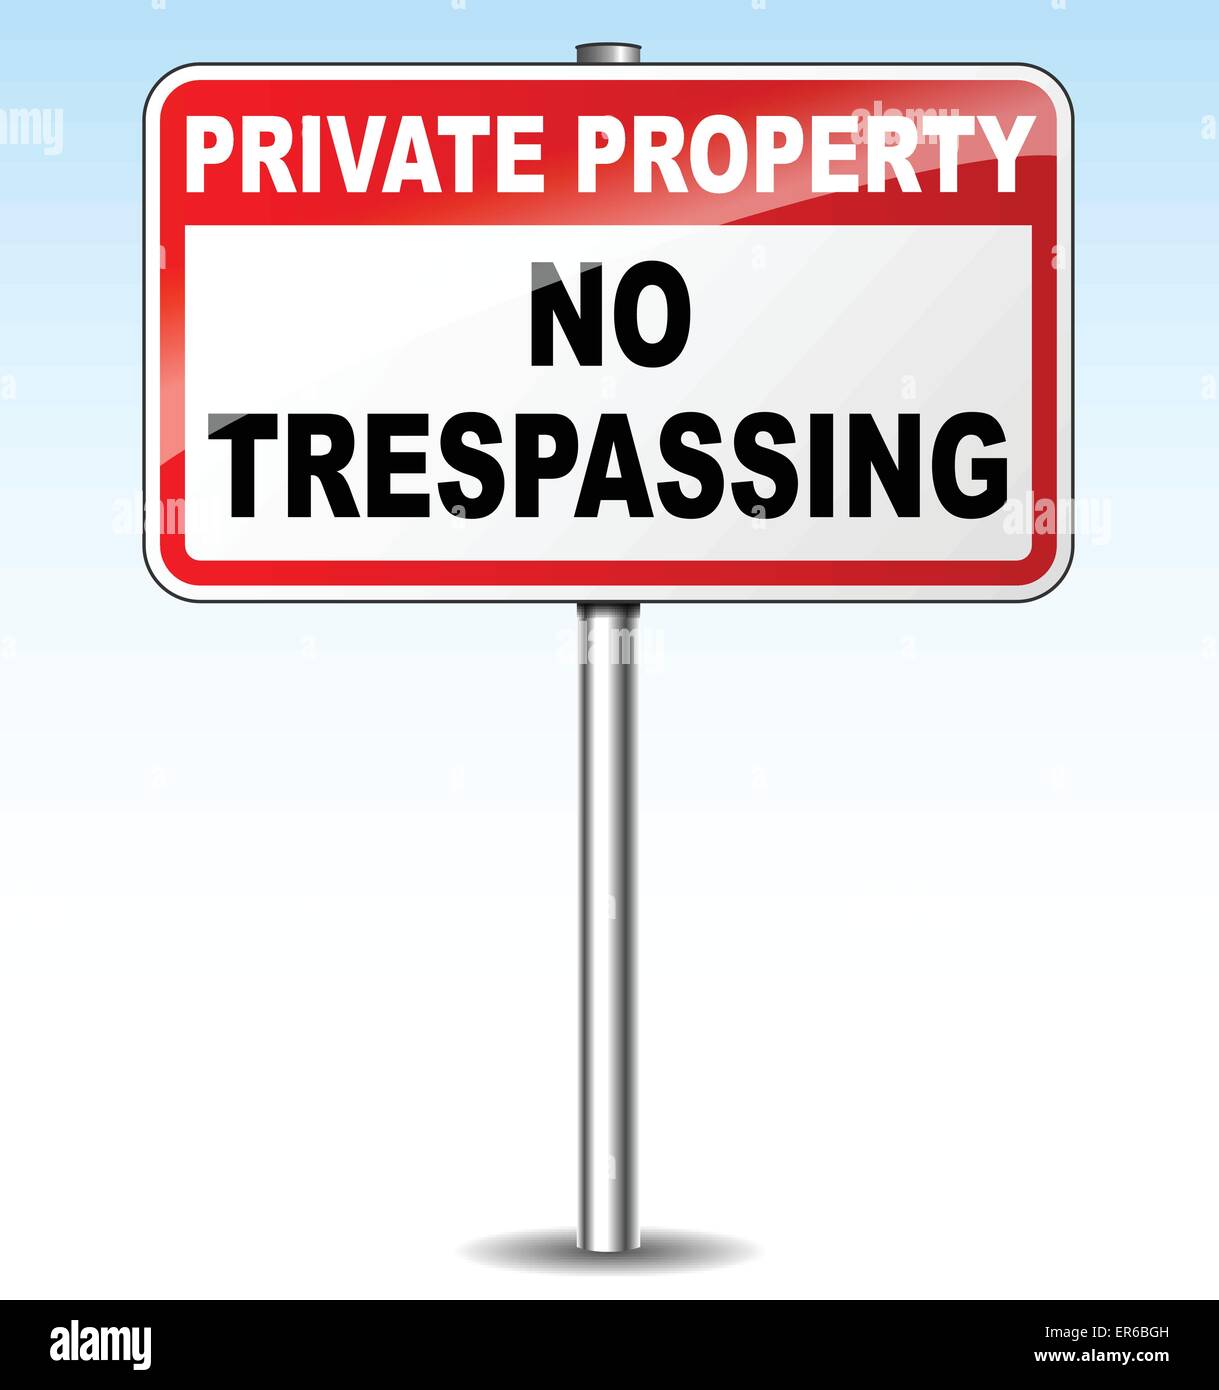 Vector illustration of no trespassing sign for private property Stock Vector